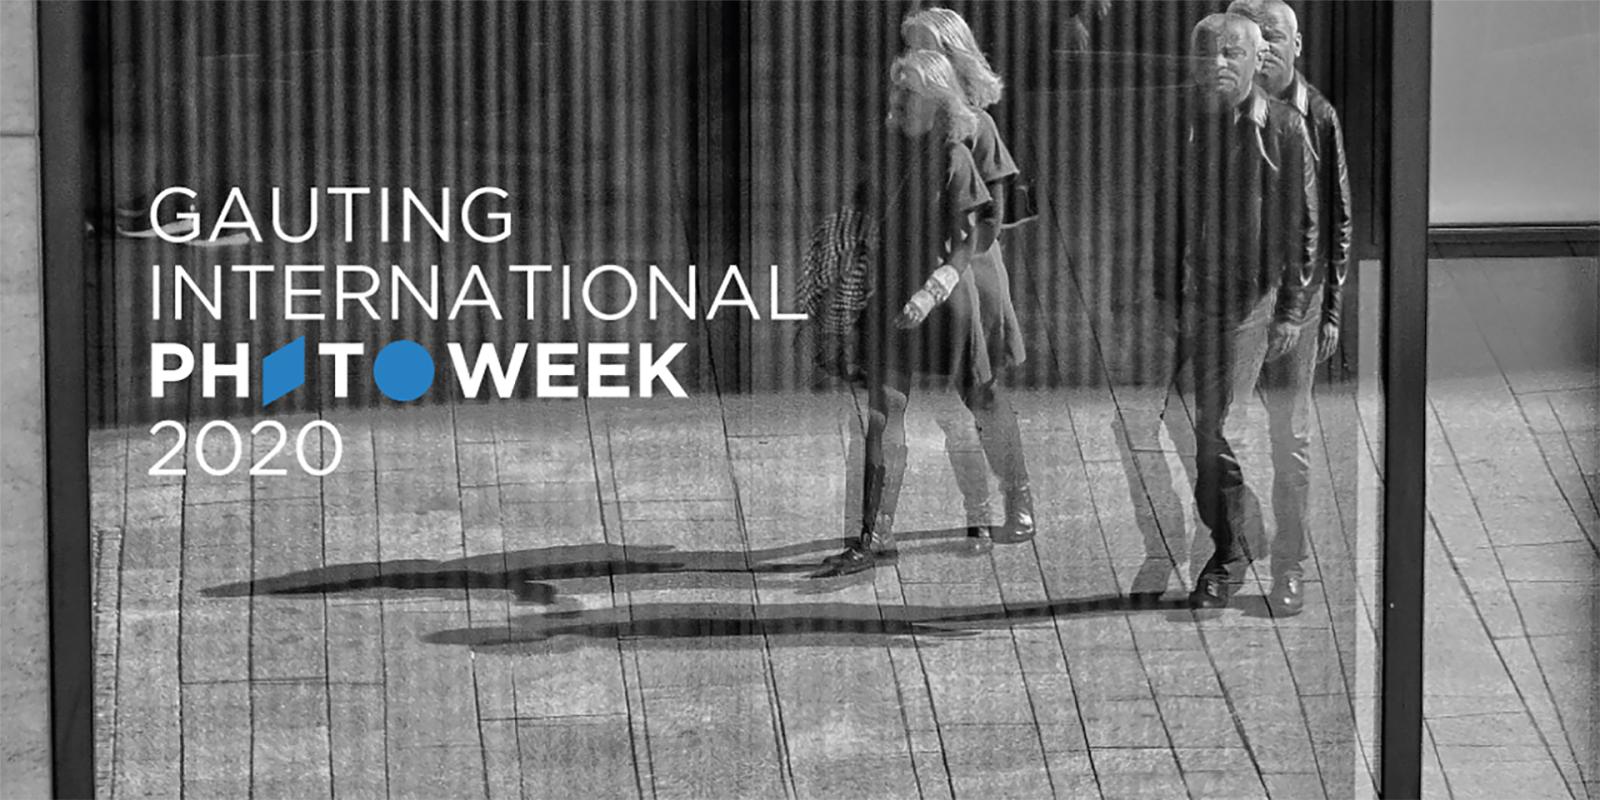 B&A Branding & Advertising Hanoi presents the marketing concept of the Gauting International Photo Week, organized by Michael Nguyen in 2020